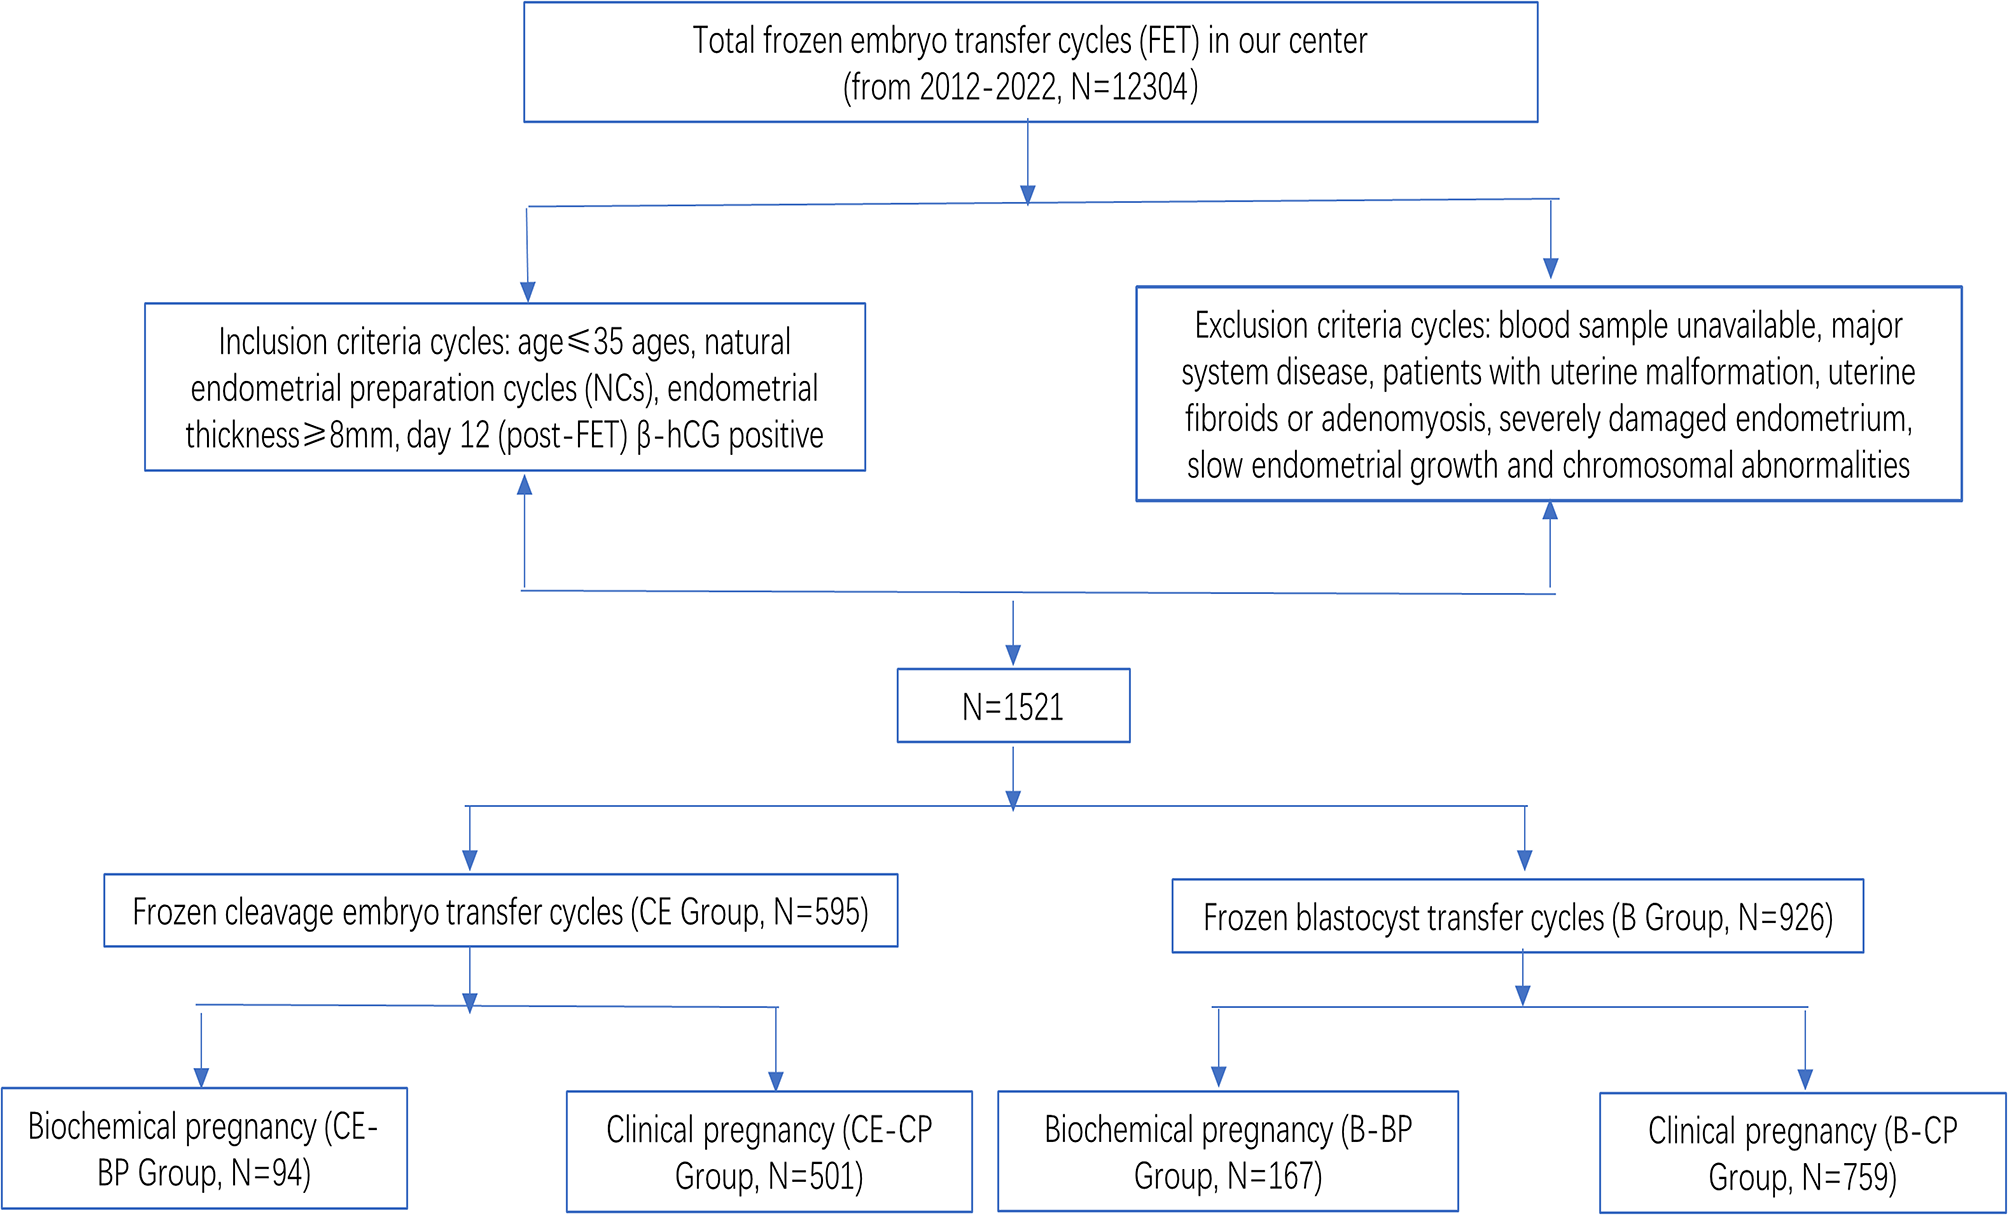 Combined analysis of estradiol and β-hCG to predict the early pregnancy outcome of FET: a retrospective study